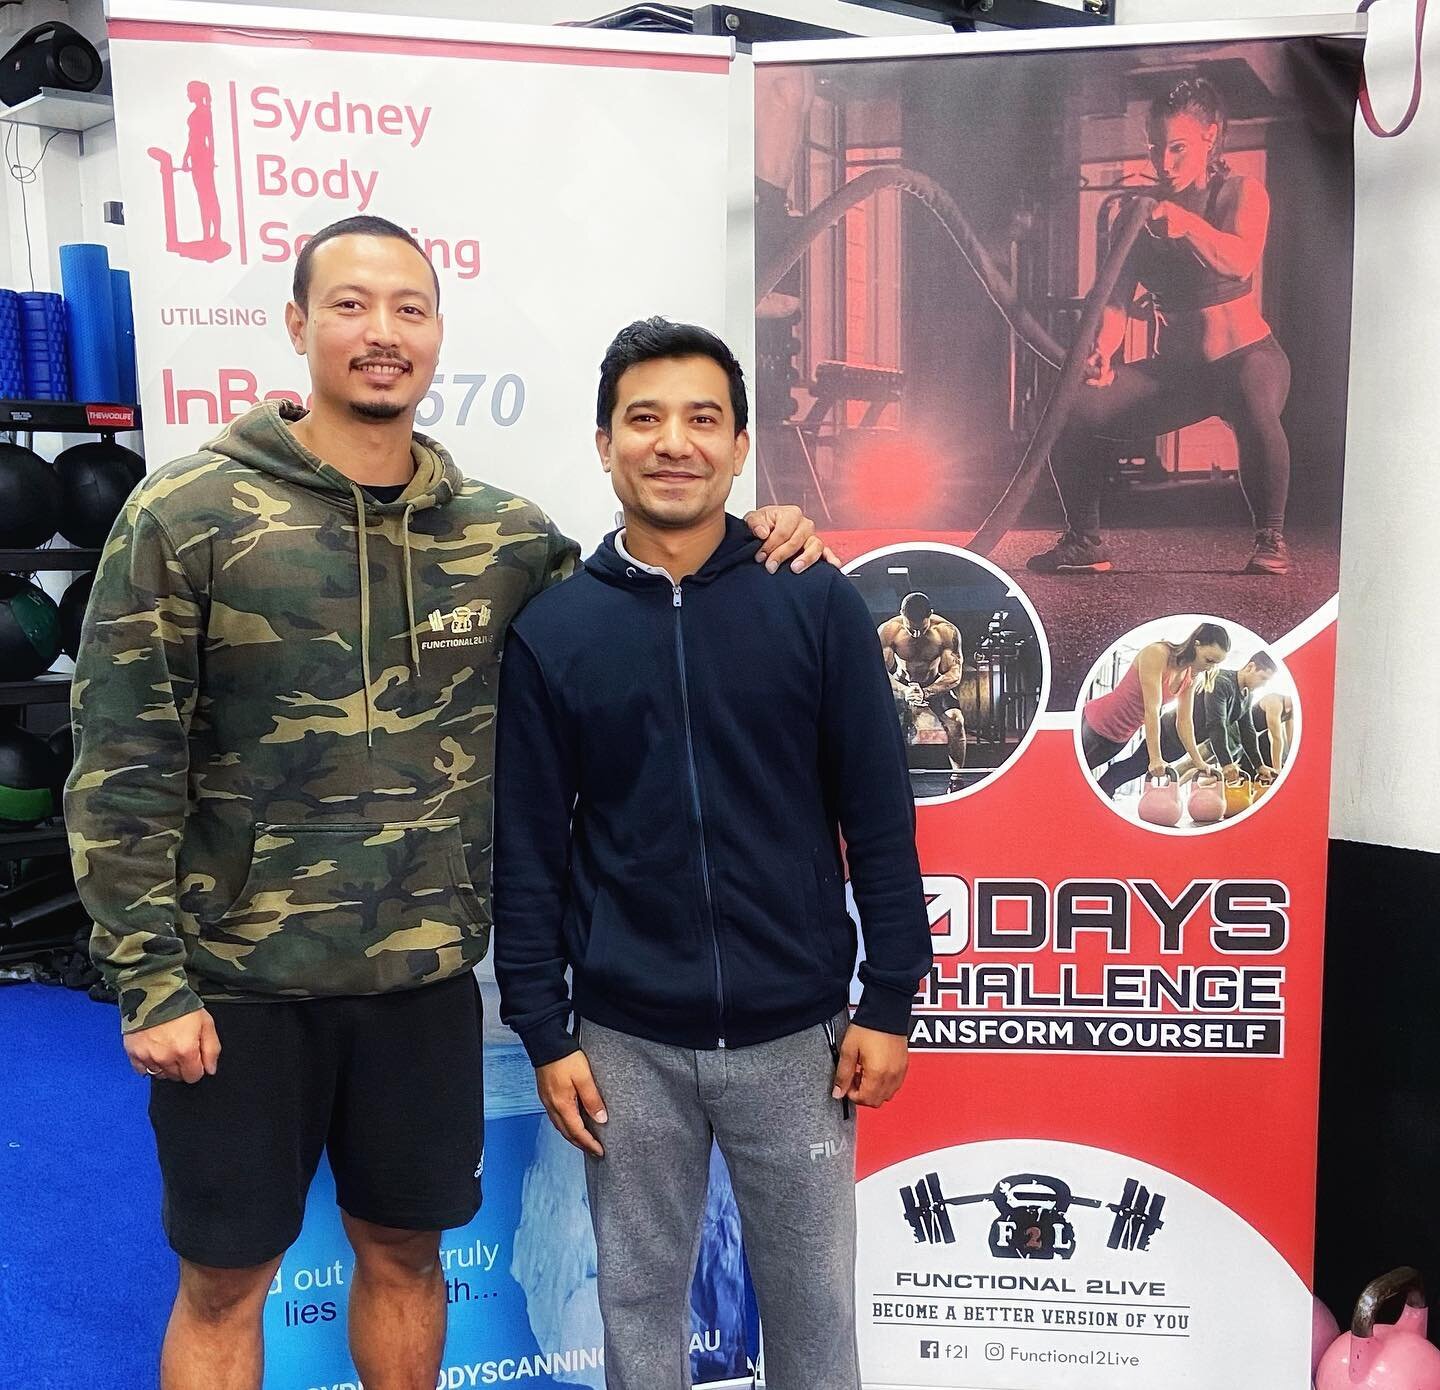 Congratulations to all the 40DC participants and the winner @manojbks 👏👏👏
Well done and very proud of you🙌🙌

Weight loss: 4.8kg
Fat loss: 8% down 

Strength gain: From 0 to 11 full pull ups in a row

@sydney_bodyscanning @madhya100 

#functional